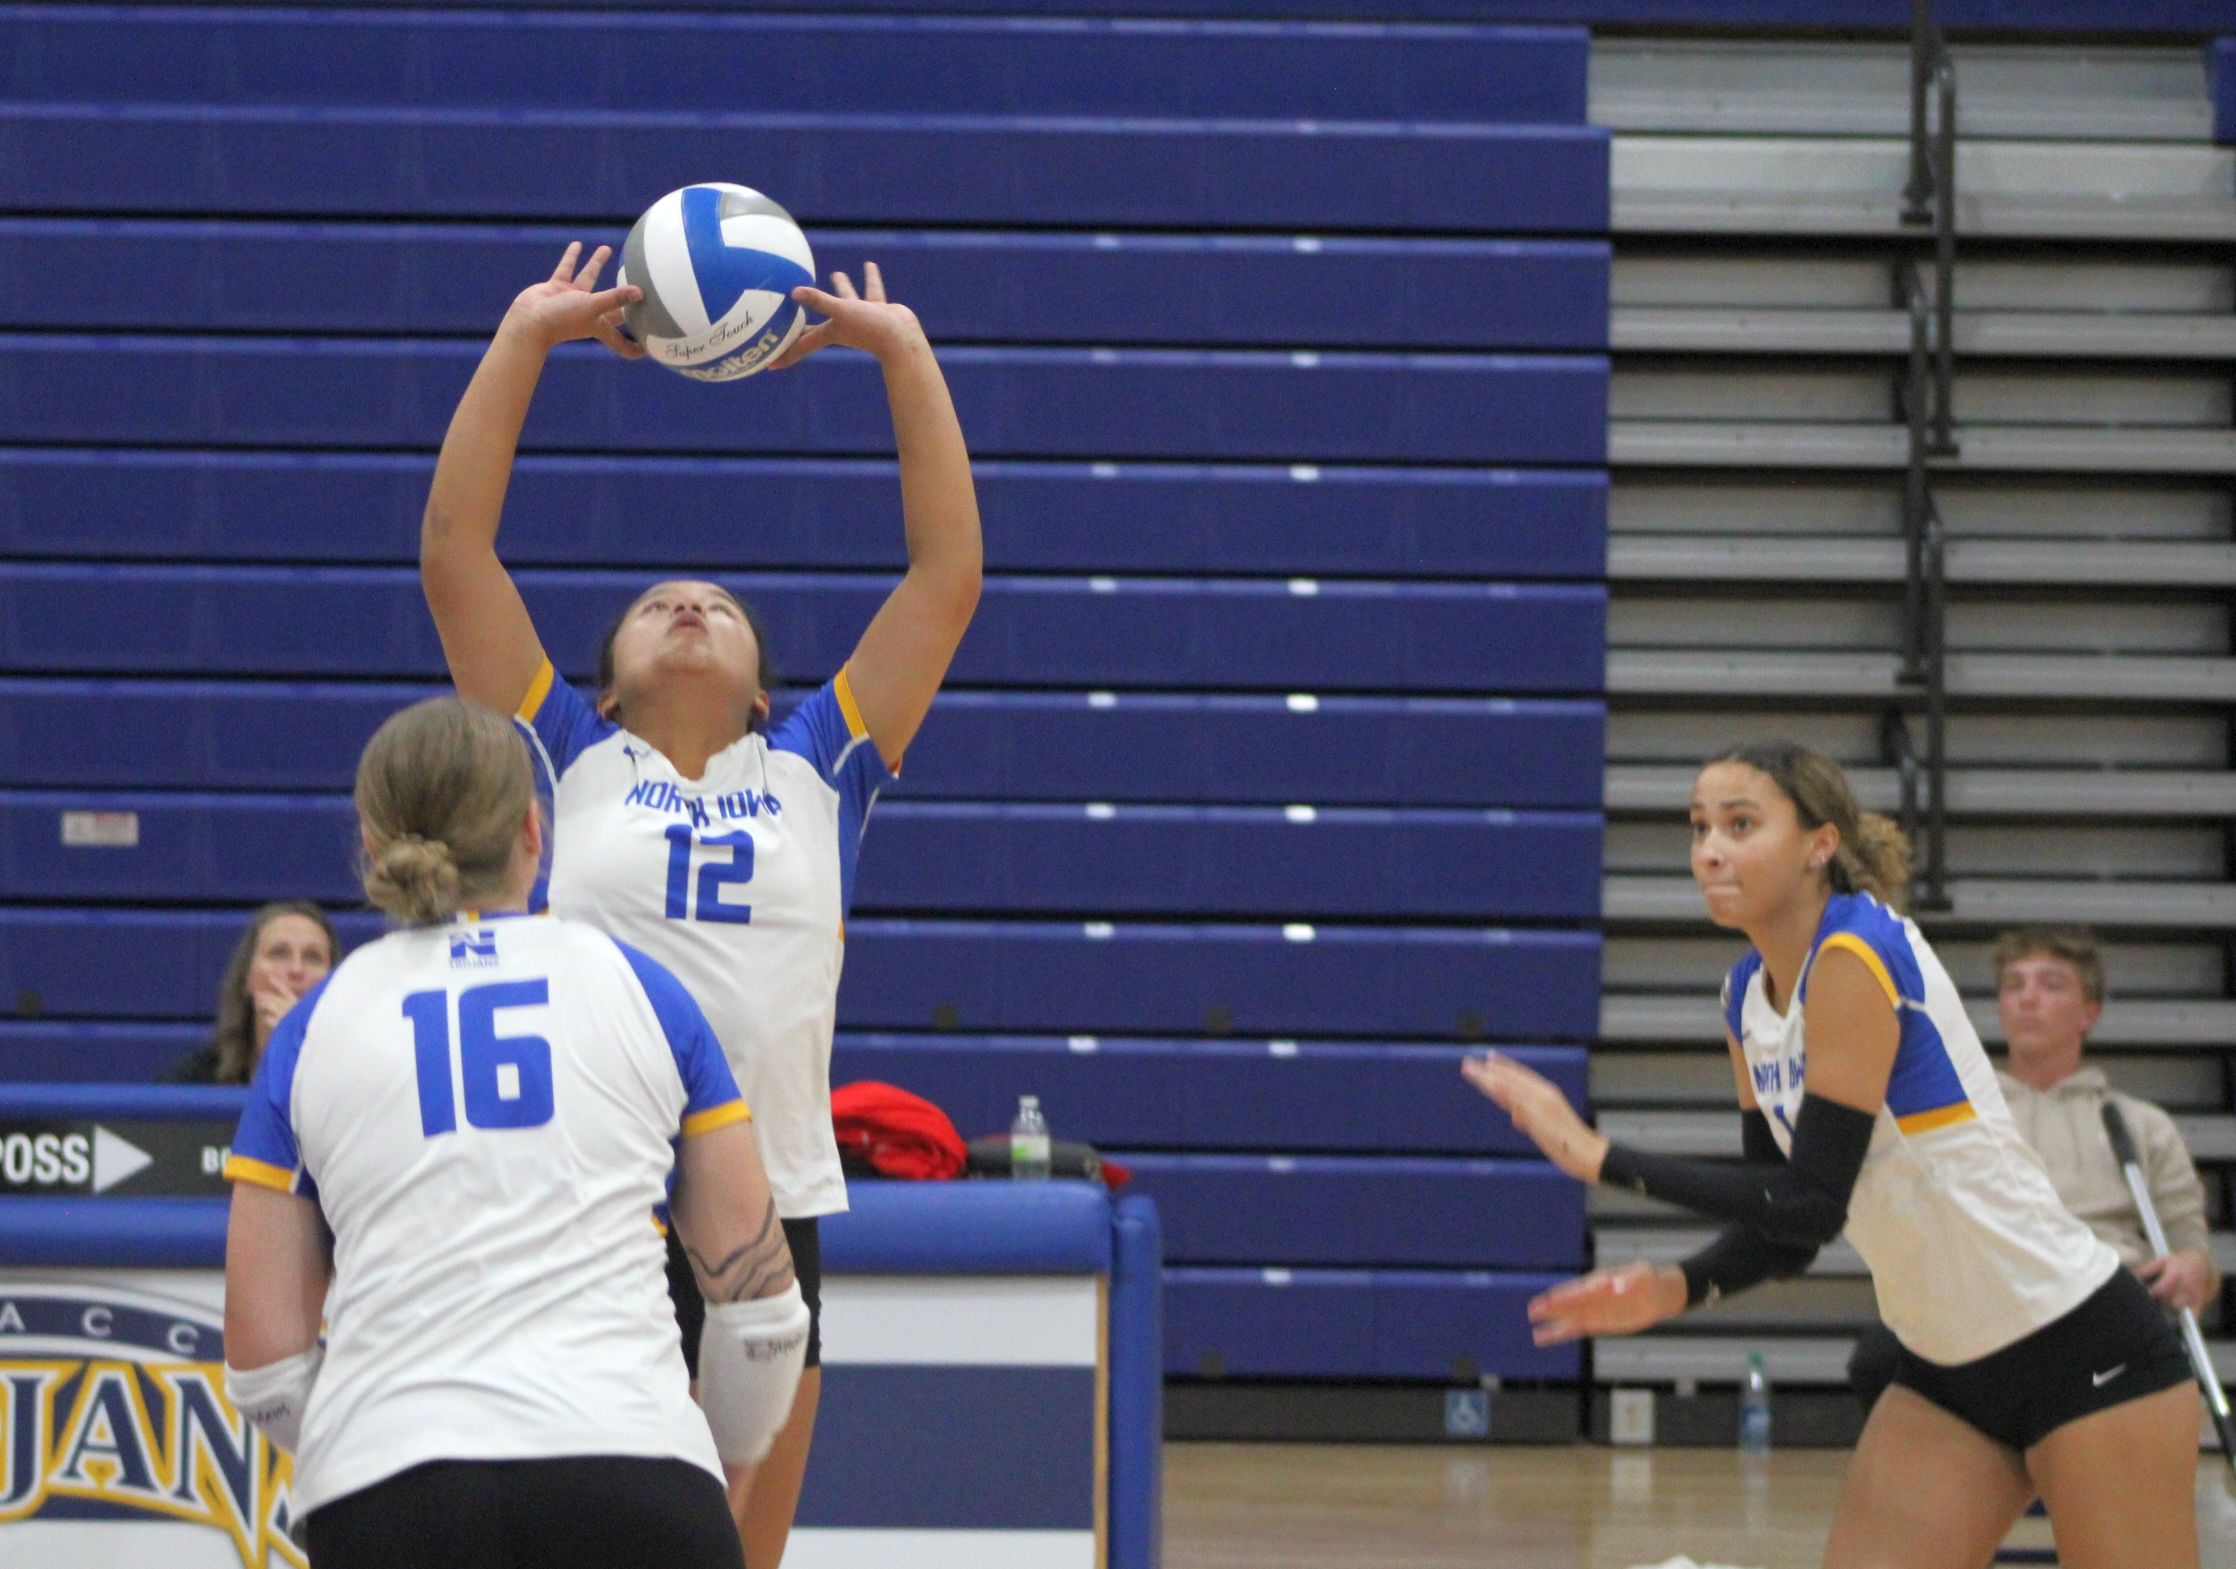 NIACC sophomore setter Iwalani Beltran passes the ball during Wednesday's match against Northeast CC.